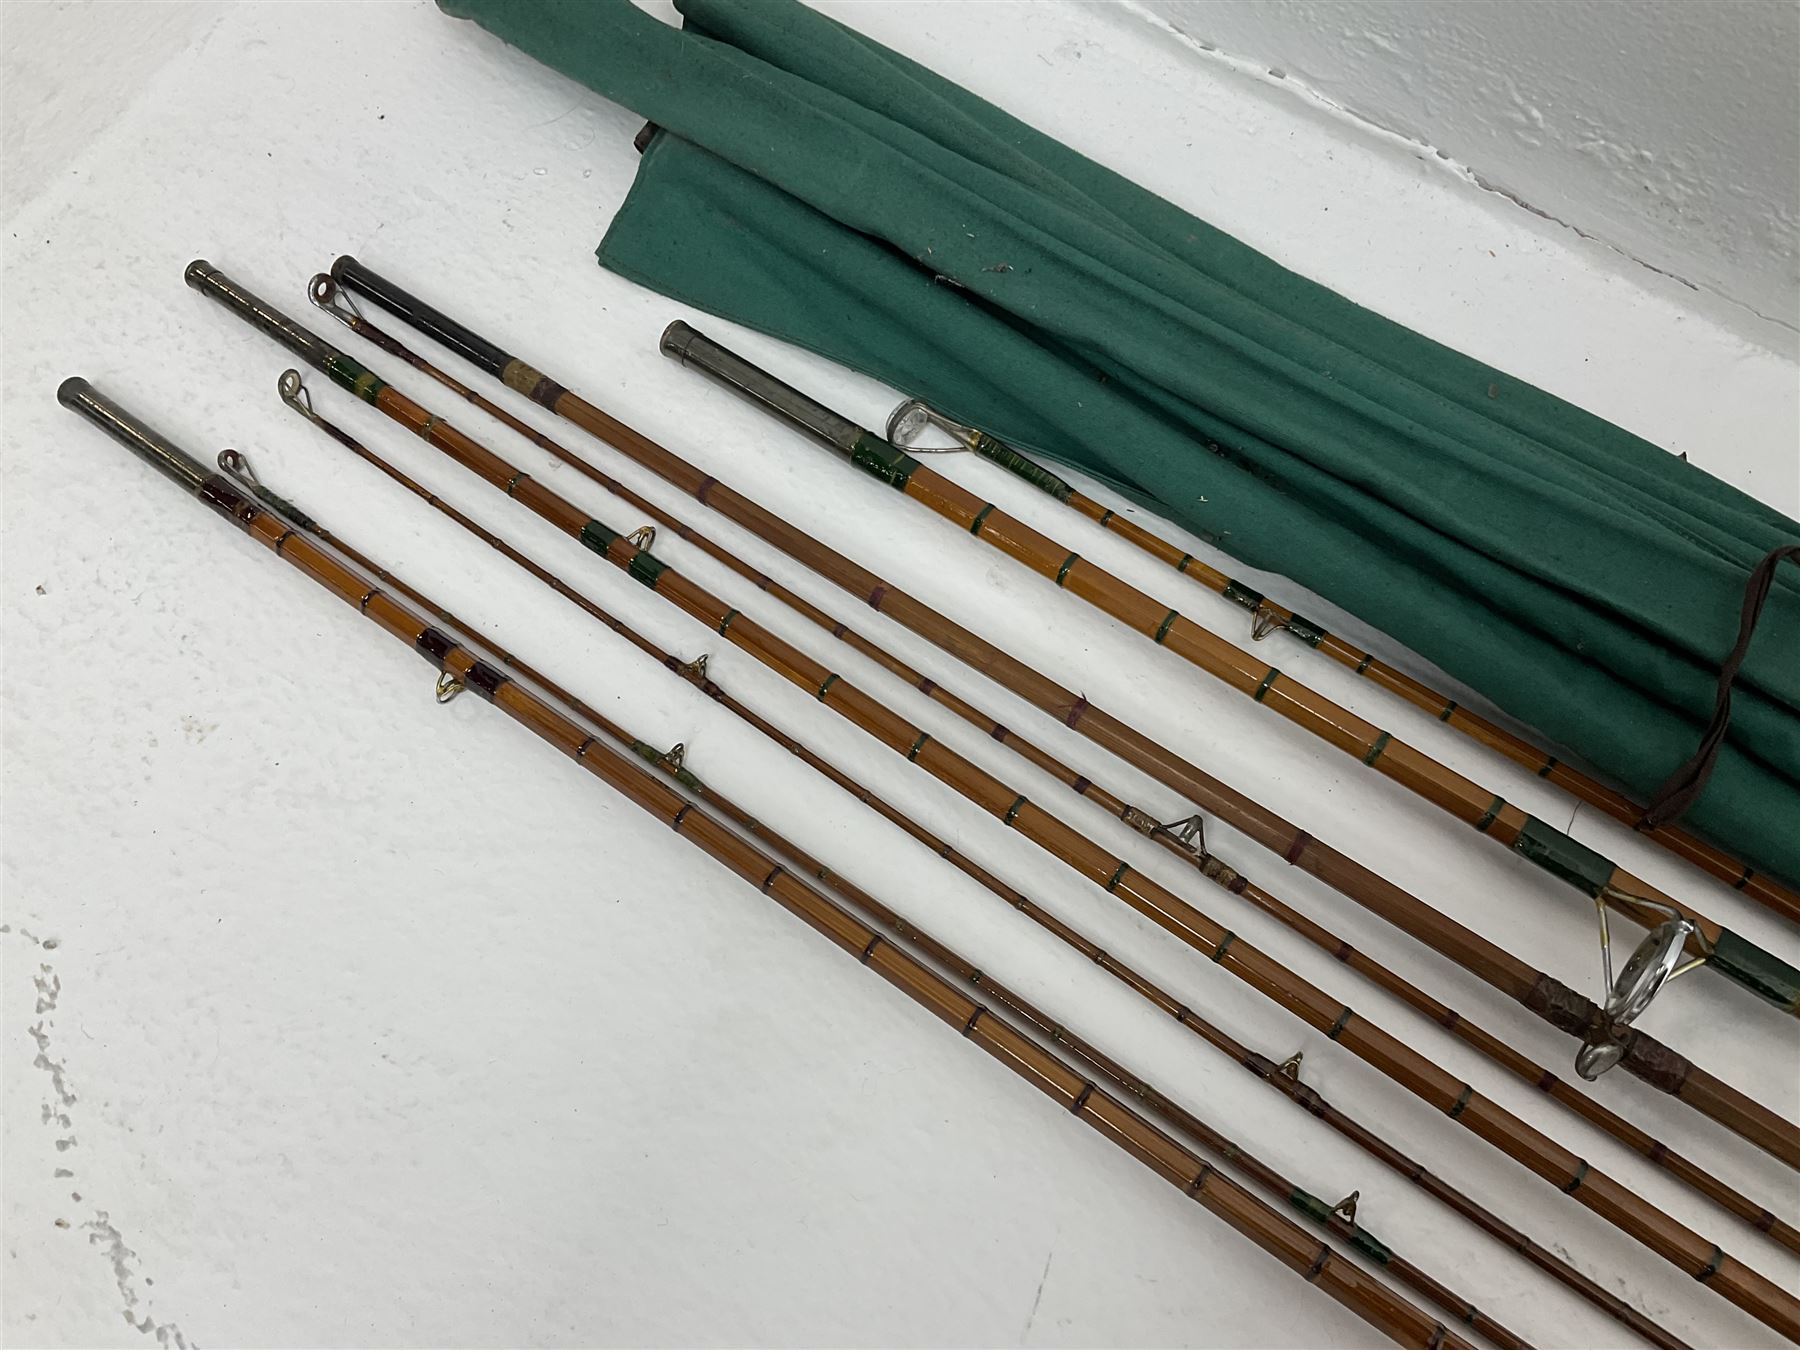 Four split cane fly fishing rods - Image 2 of 6